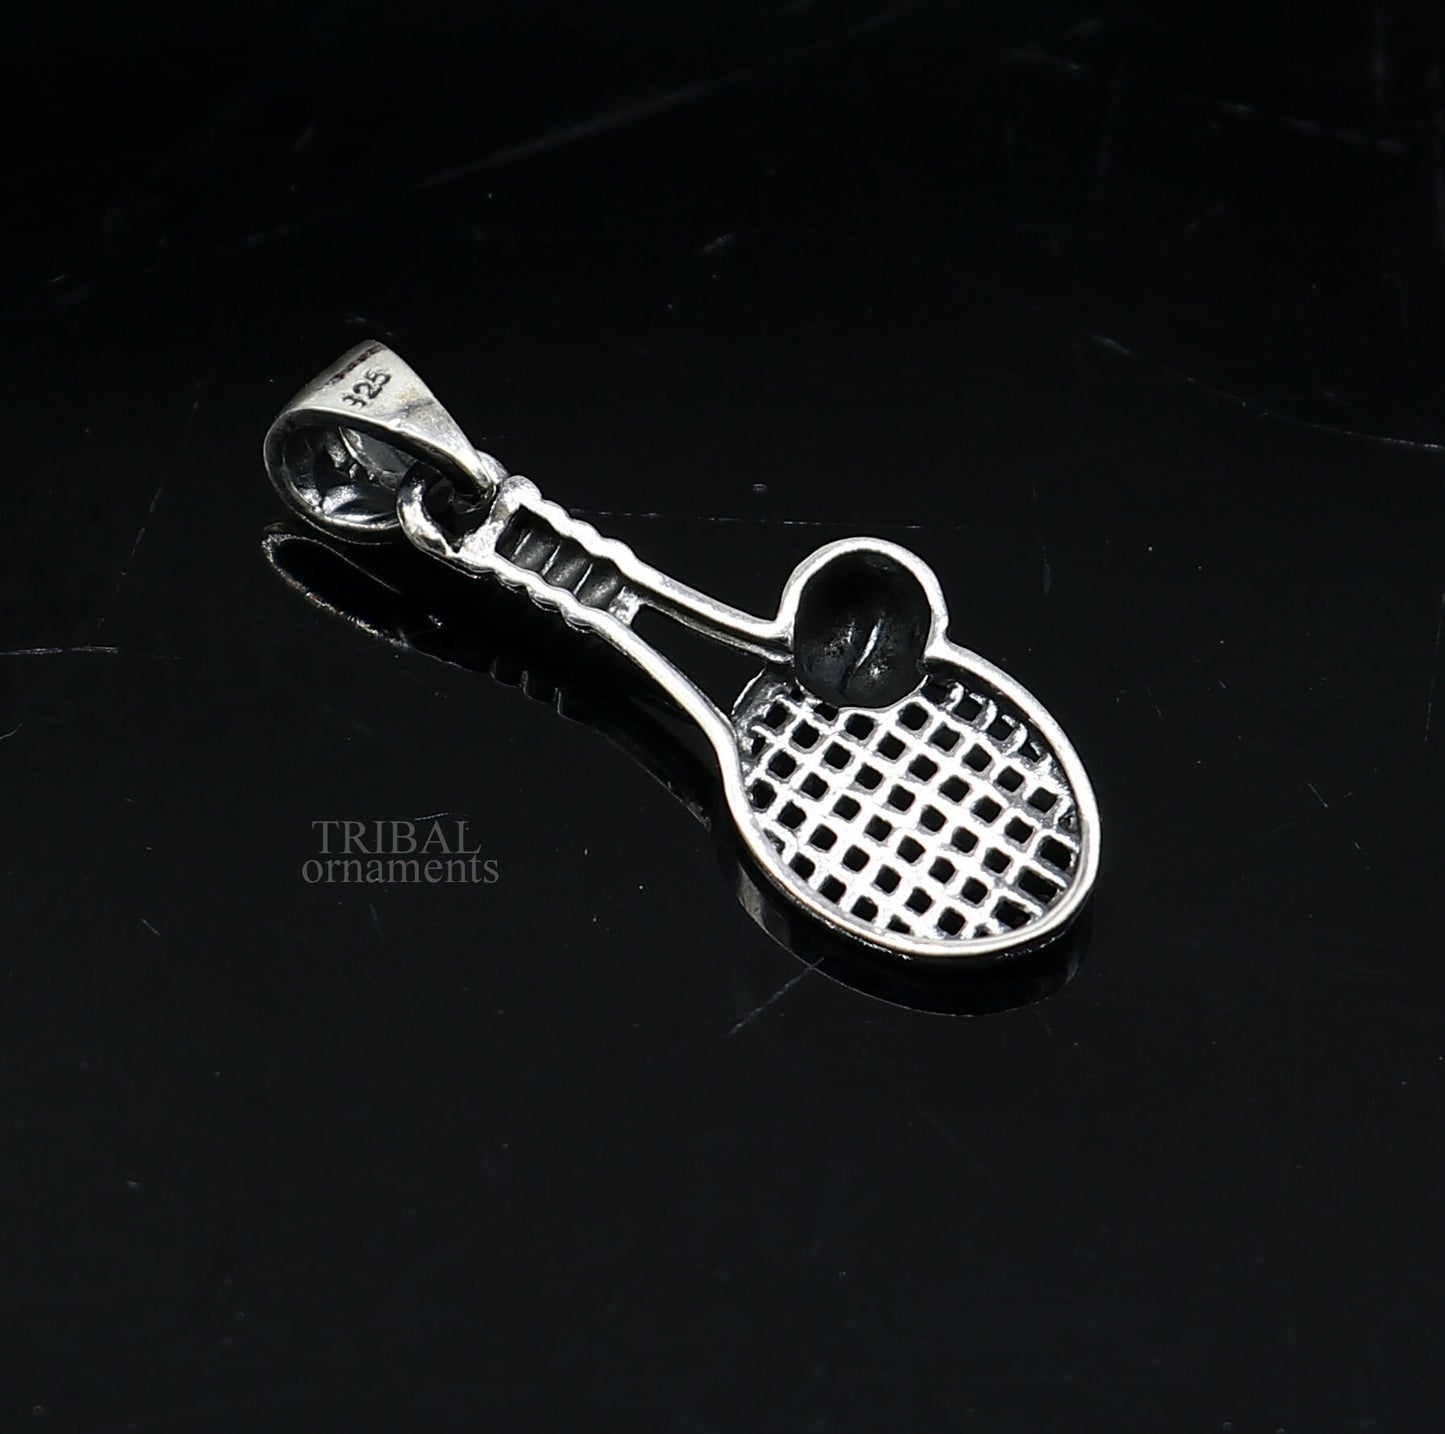 925 sterling silver handmade stylish design small Tennis racket style pendant best gifting jewelry religious pendant custom jewelry ssp1689 - TRIBAL ORNAMENTS